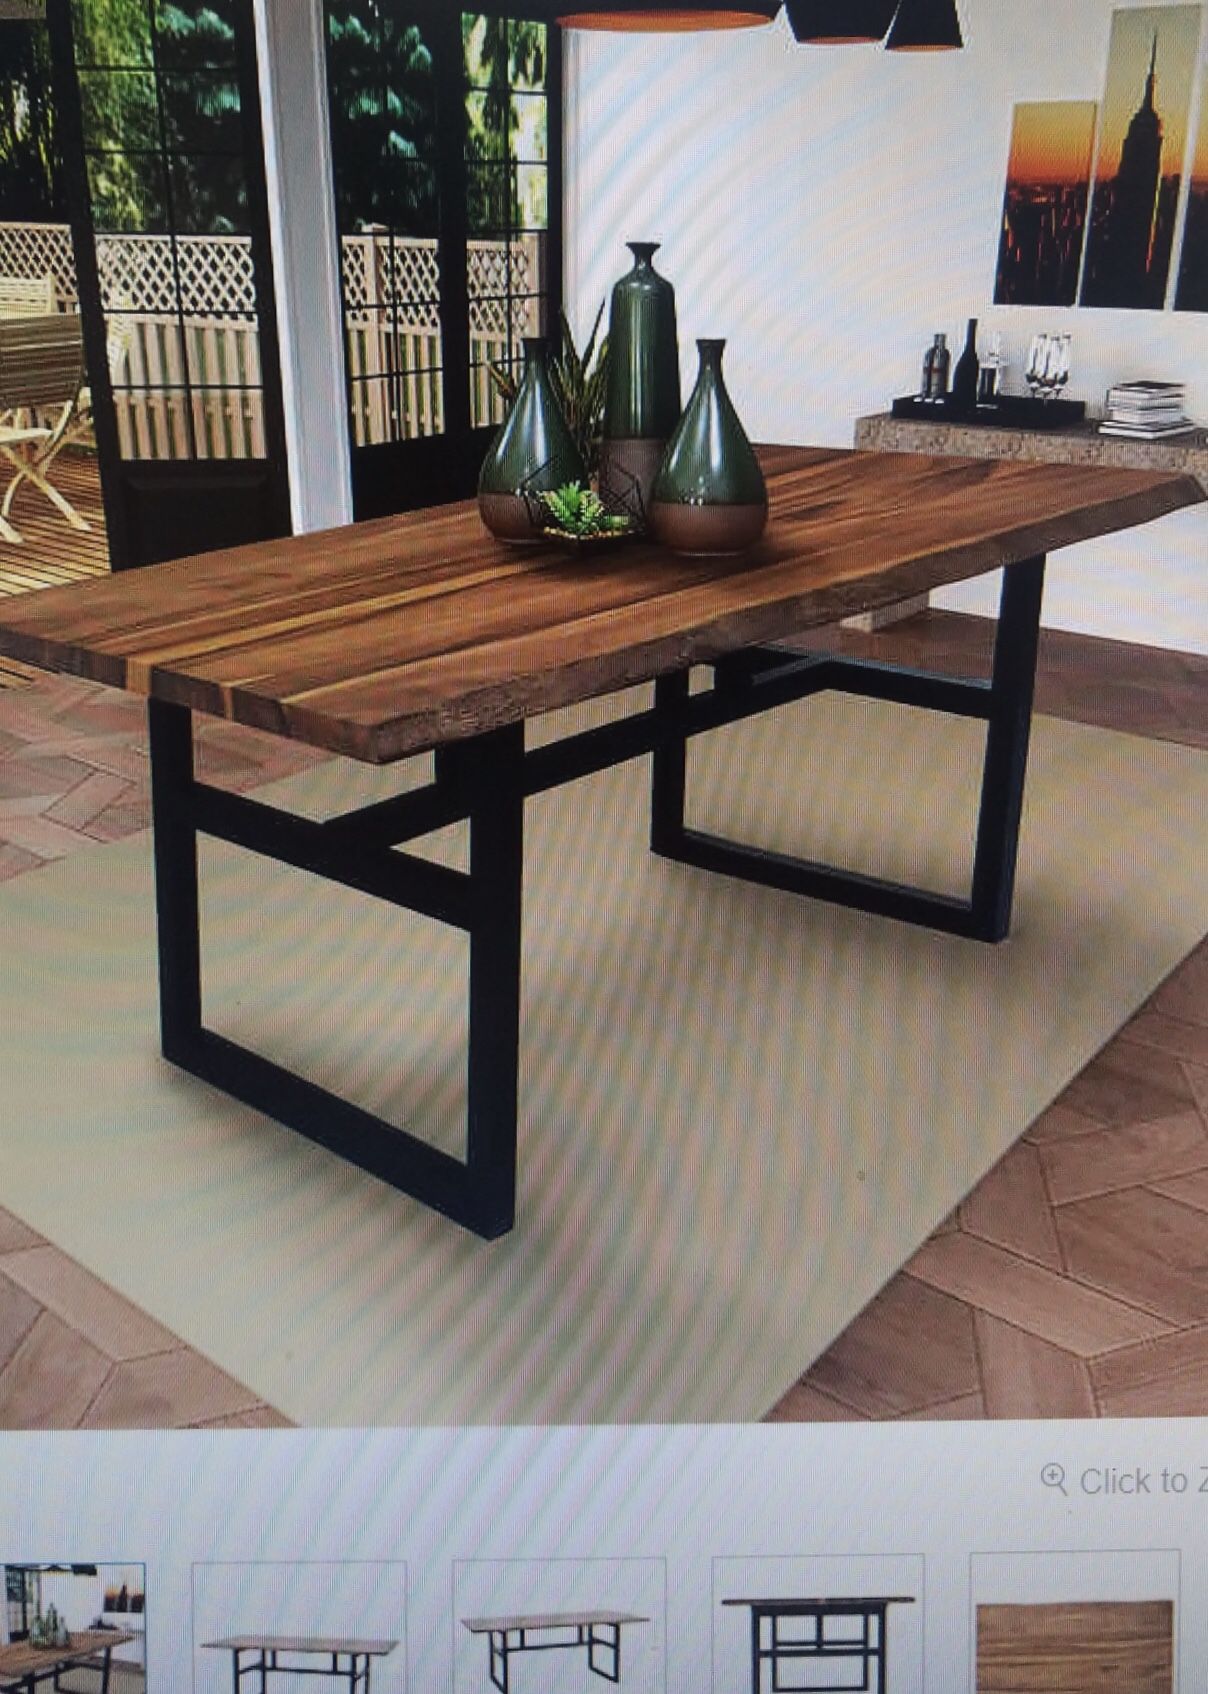 Gable Live Edge Rustic and Modern Wood Dining Room Kitchen Table - NEW IN BOX